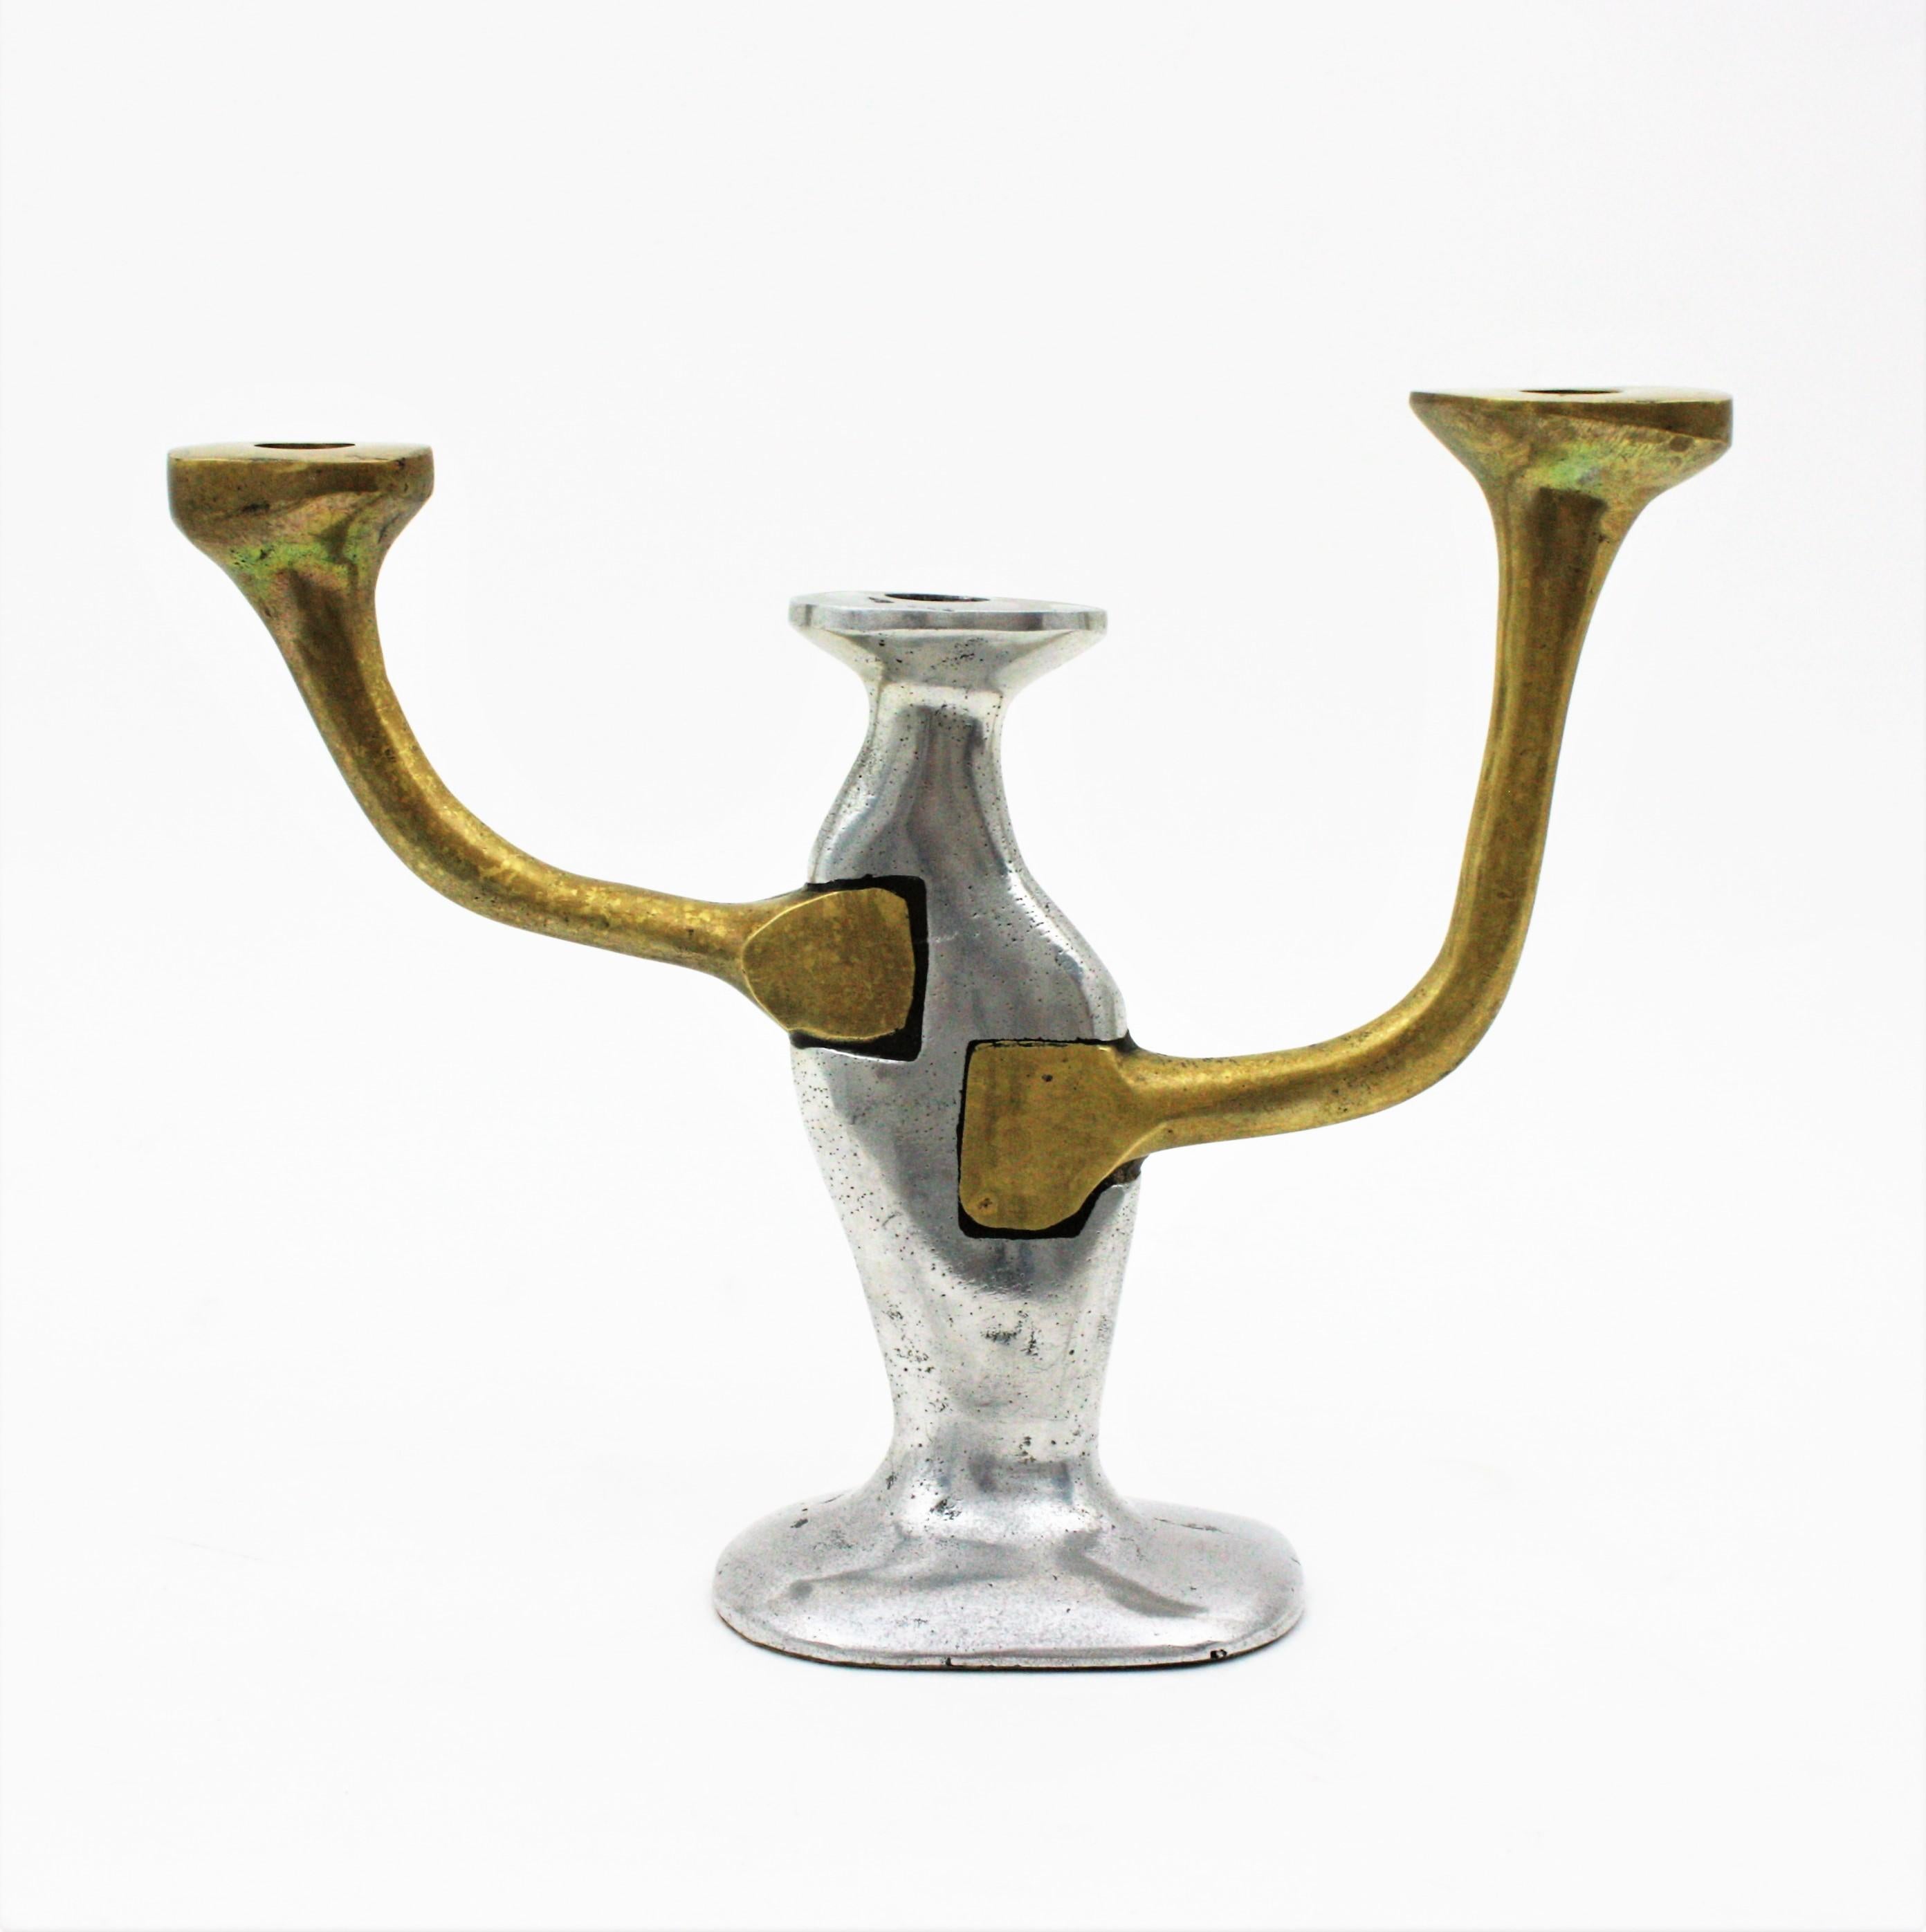 Aluminium and Brass Brutalist Candle Holder by David Marshall, Spain, 1970s.

David Marshall Desenos Brutalist three-arm aluminum and brass candlestick.
Very good condition.
Original patina.
Very good vintage condition with minor wear commensurate